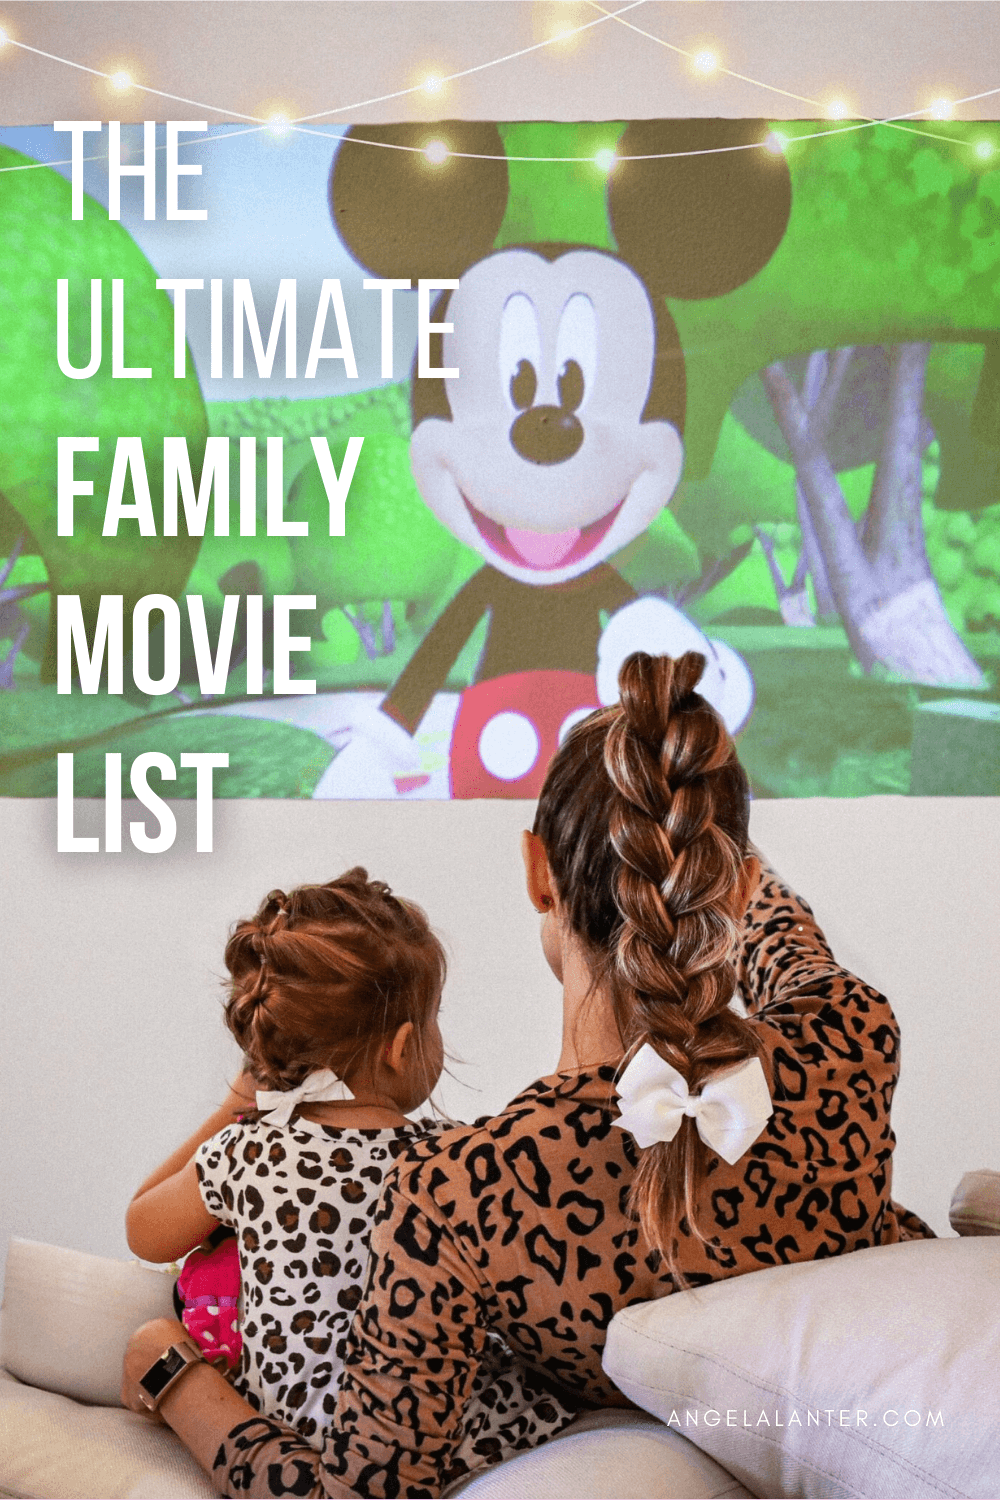 Movies To Watch With Family: THE ULTIMATE FAMILY MOVIE LIST